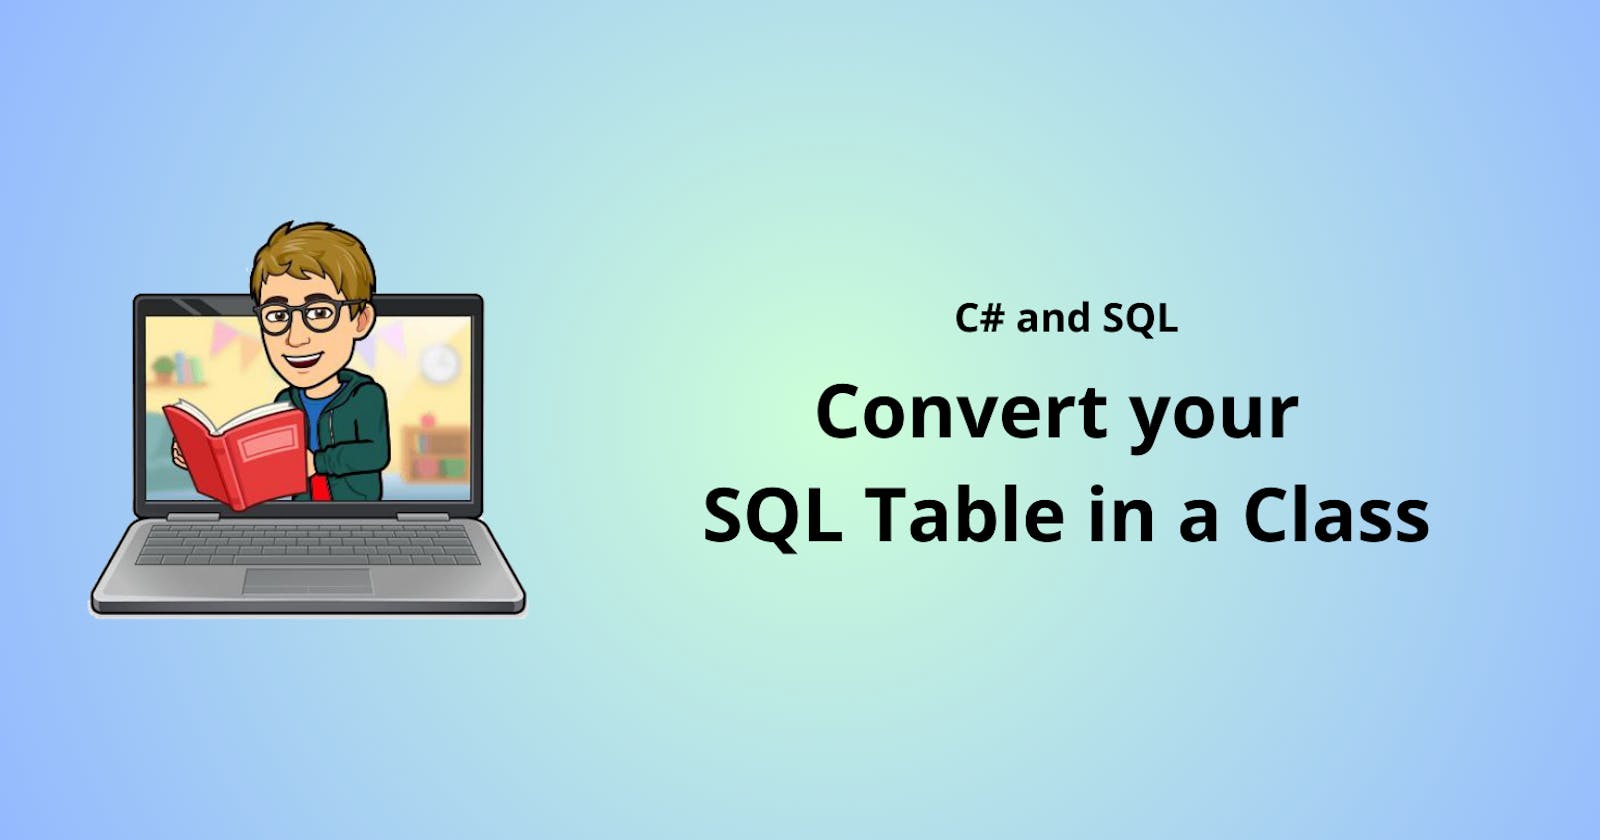 Convert your SQL Table in a Class